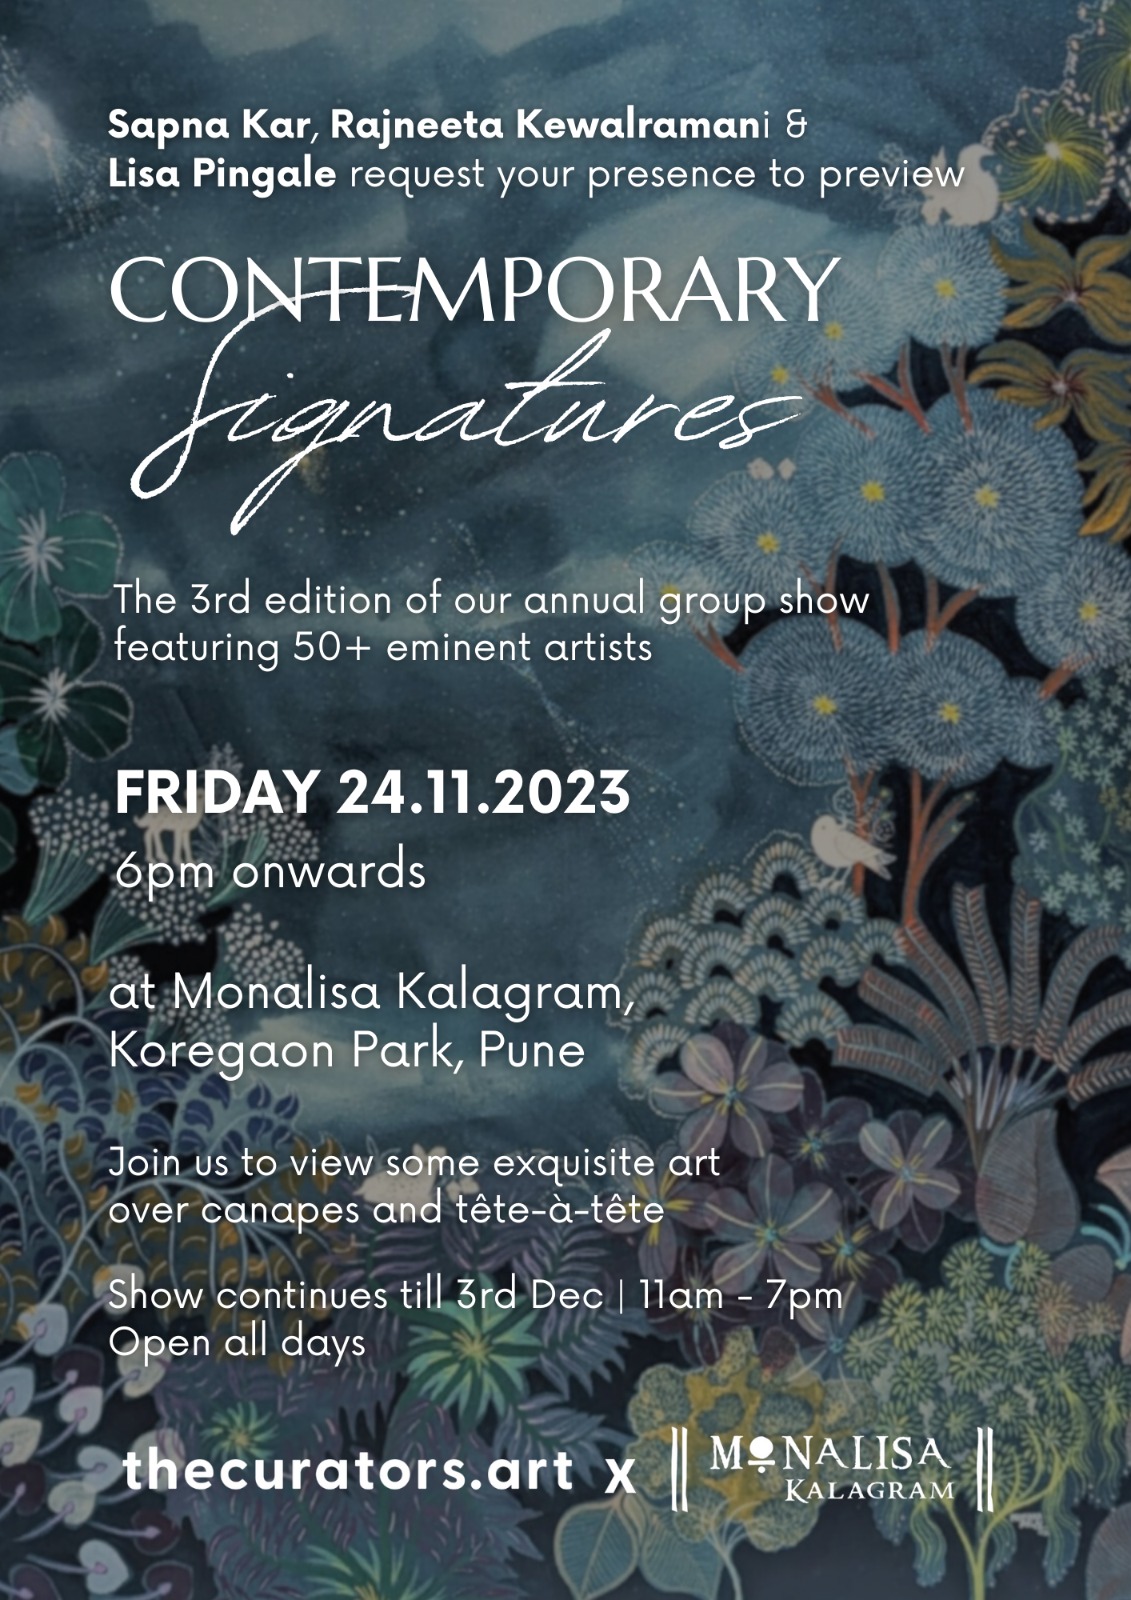 Contemporary Signatures - A group show featuring 50+ eminent artists